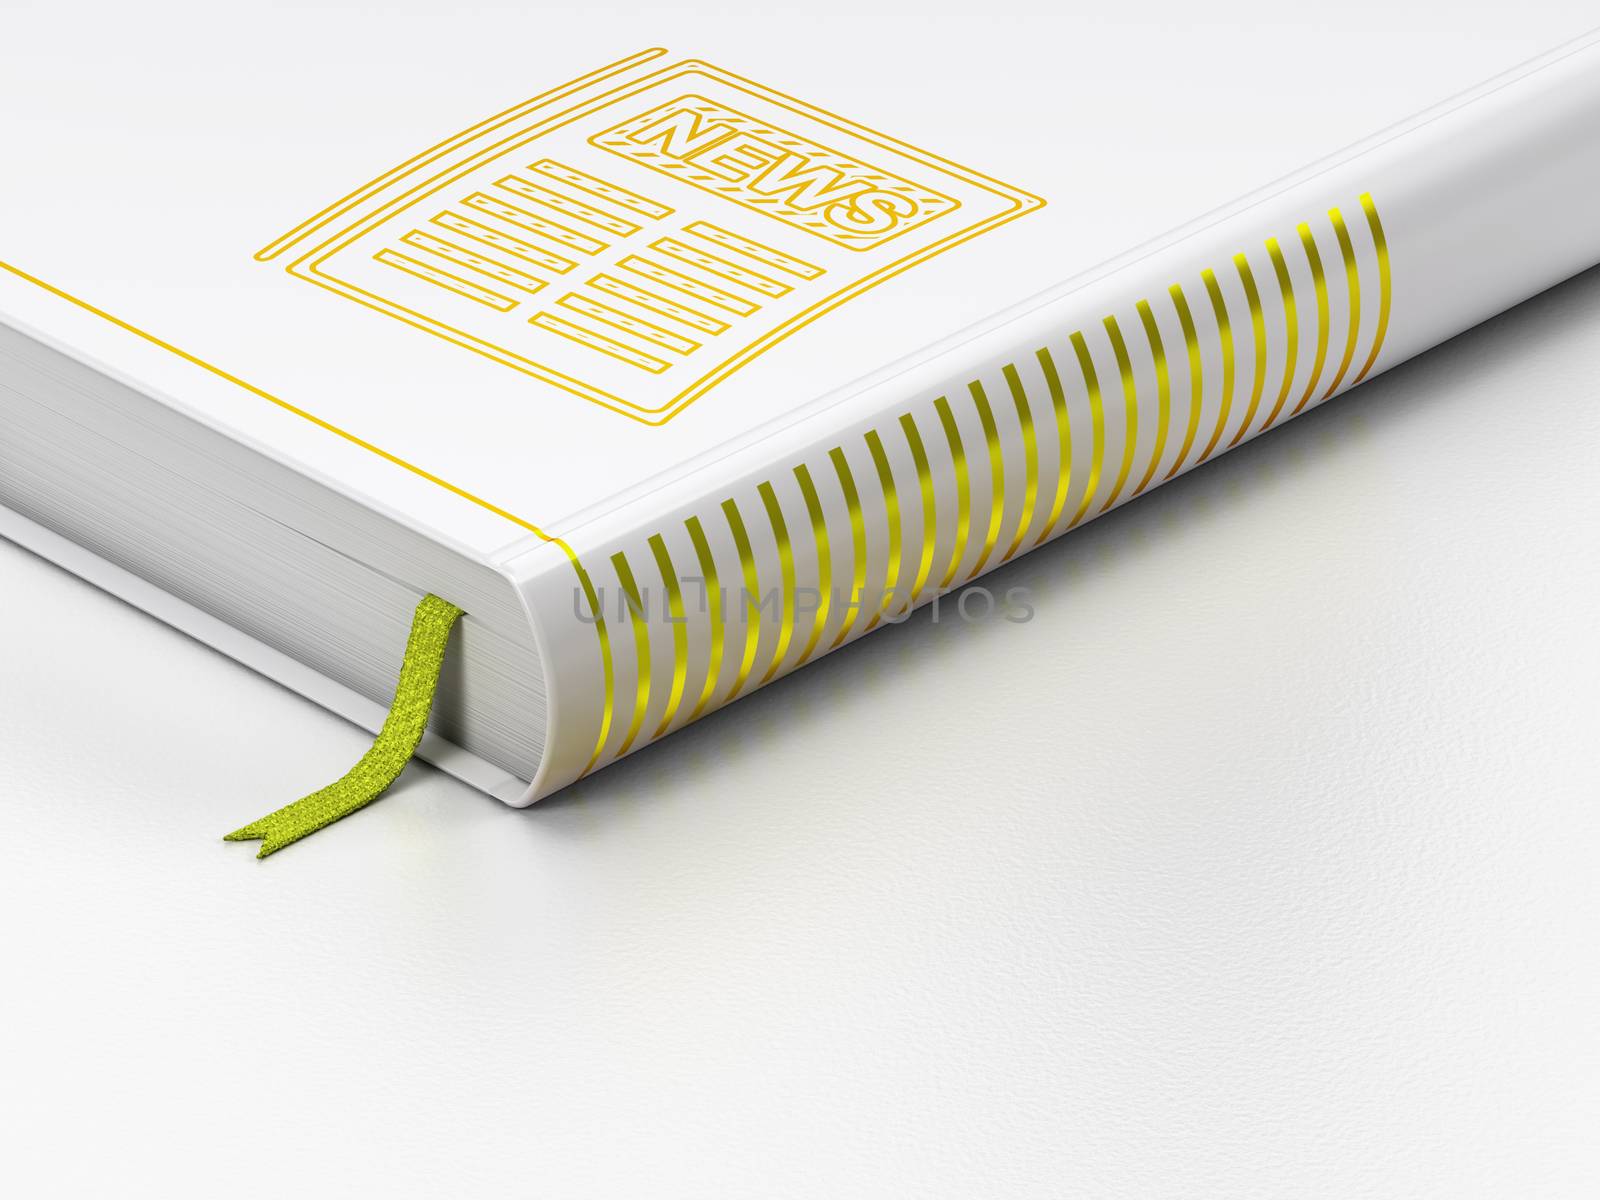 News concept: closed book with Gold Newspaper icon on floor, white background, 3D rendering